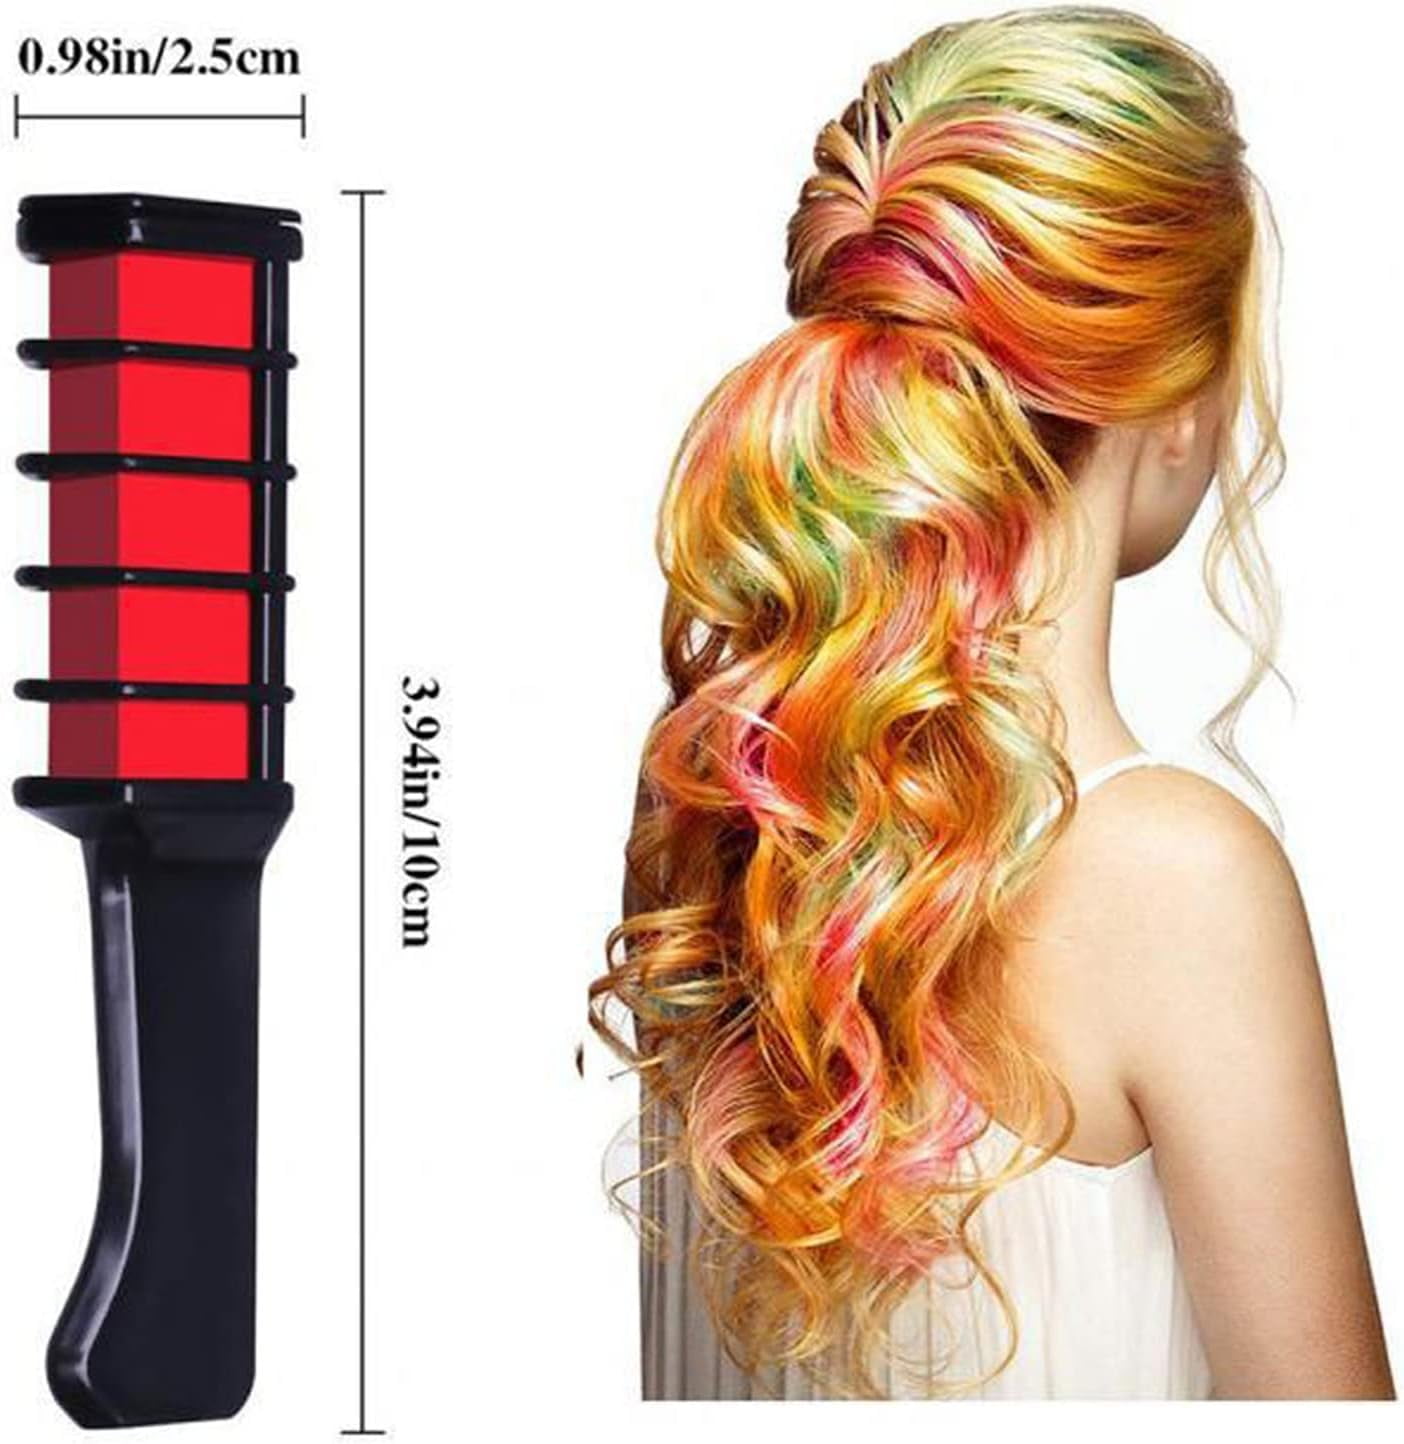 Temporary Hair Dye, Hair Dye Glow in the Dark Paint Can Dye More 55% Hair  Than Hair Chalk on Christmas, Birthday and Music Festival Party Supplies,  Gifts for Girls and Boys